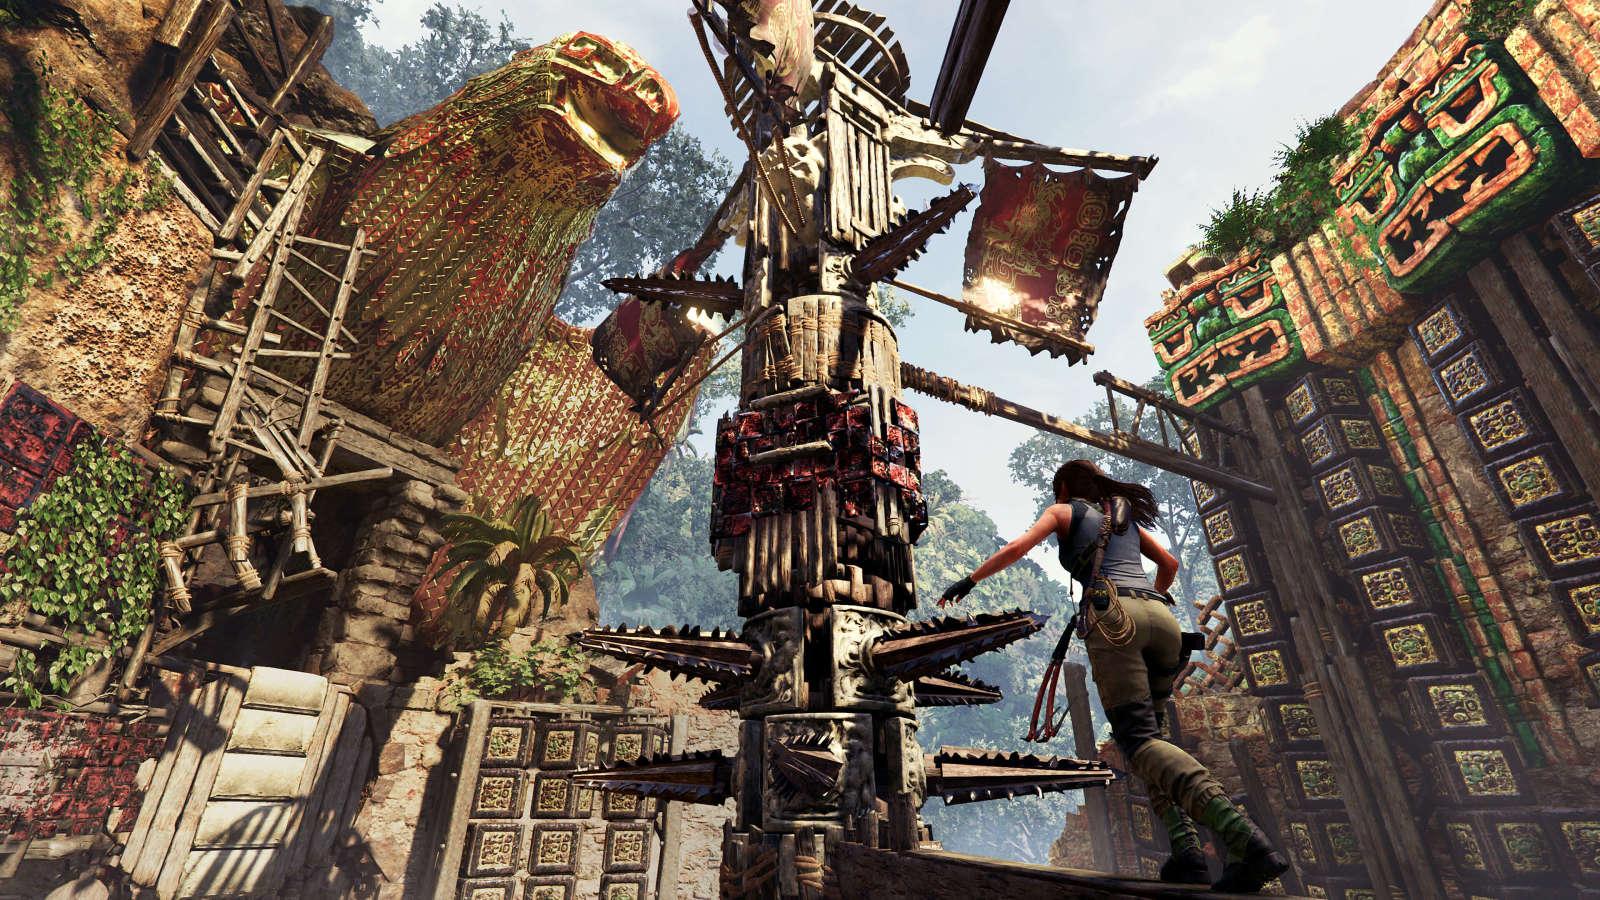 Lara Croft climbing an intricate wooden structure adorned with colorful tribal decorations in a dense, ruin-filled jungle setting.